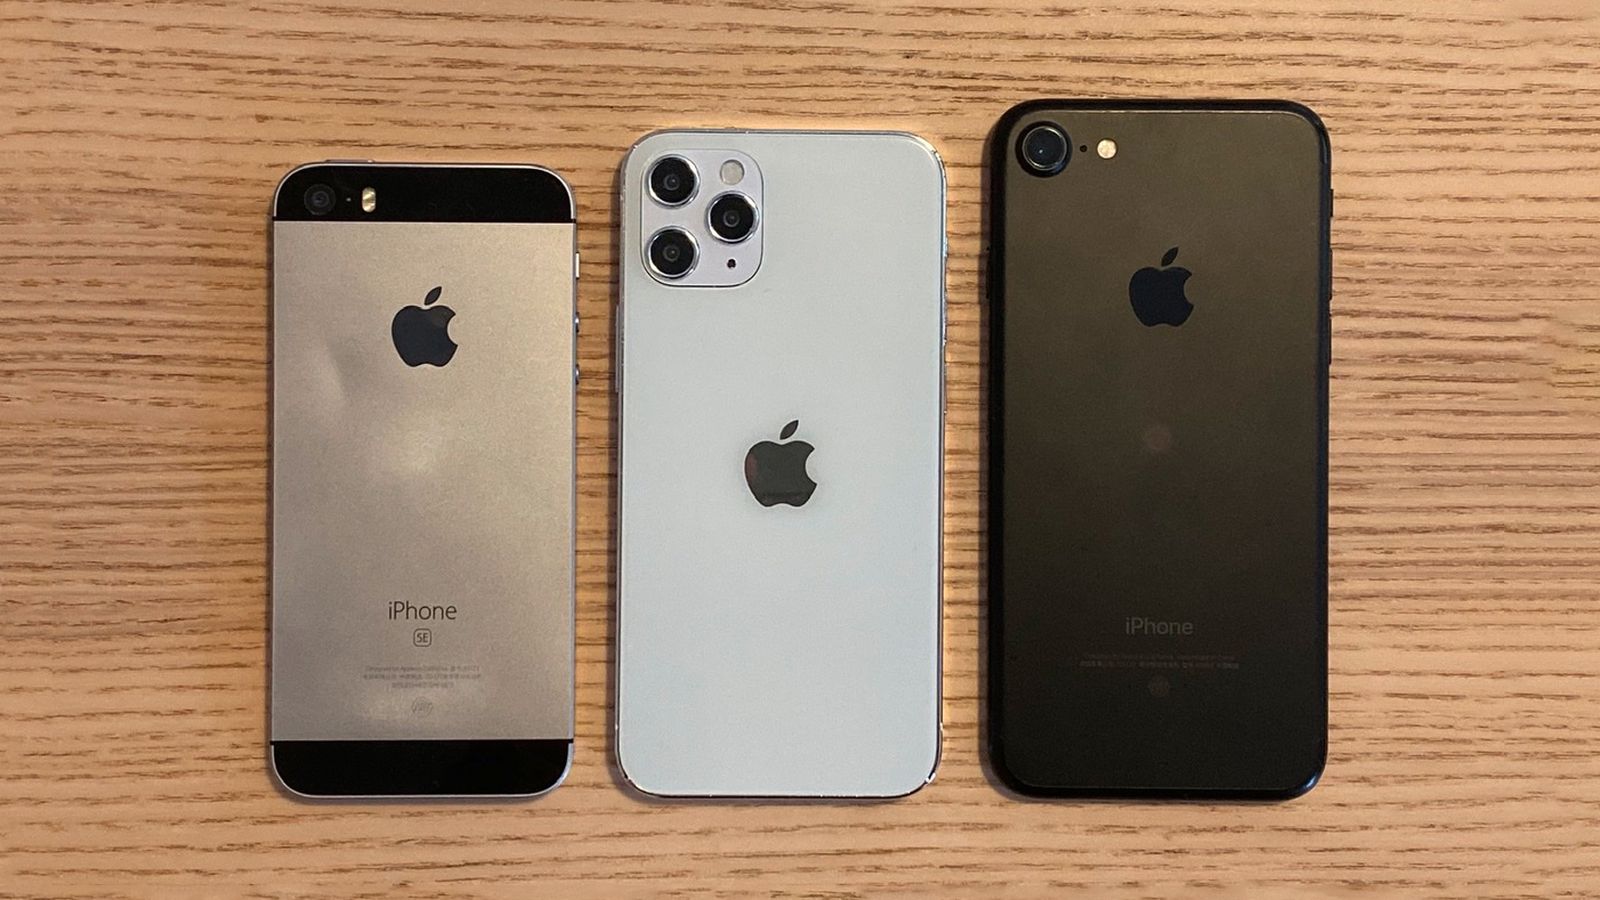 5 4 Inch Iphone 12 Model Size Compared To Original Iphone Se And Iphone 7 Macrumors